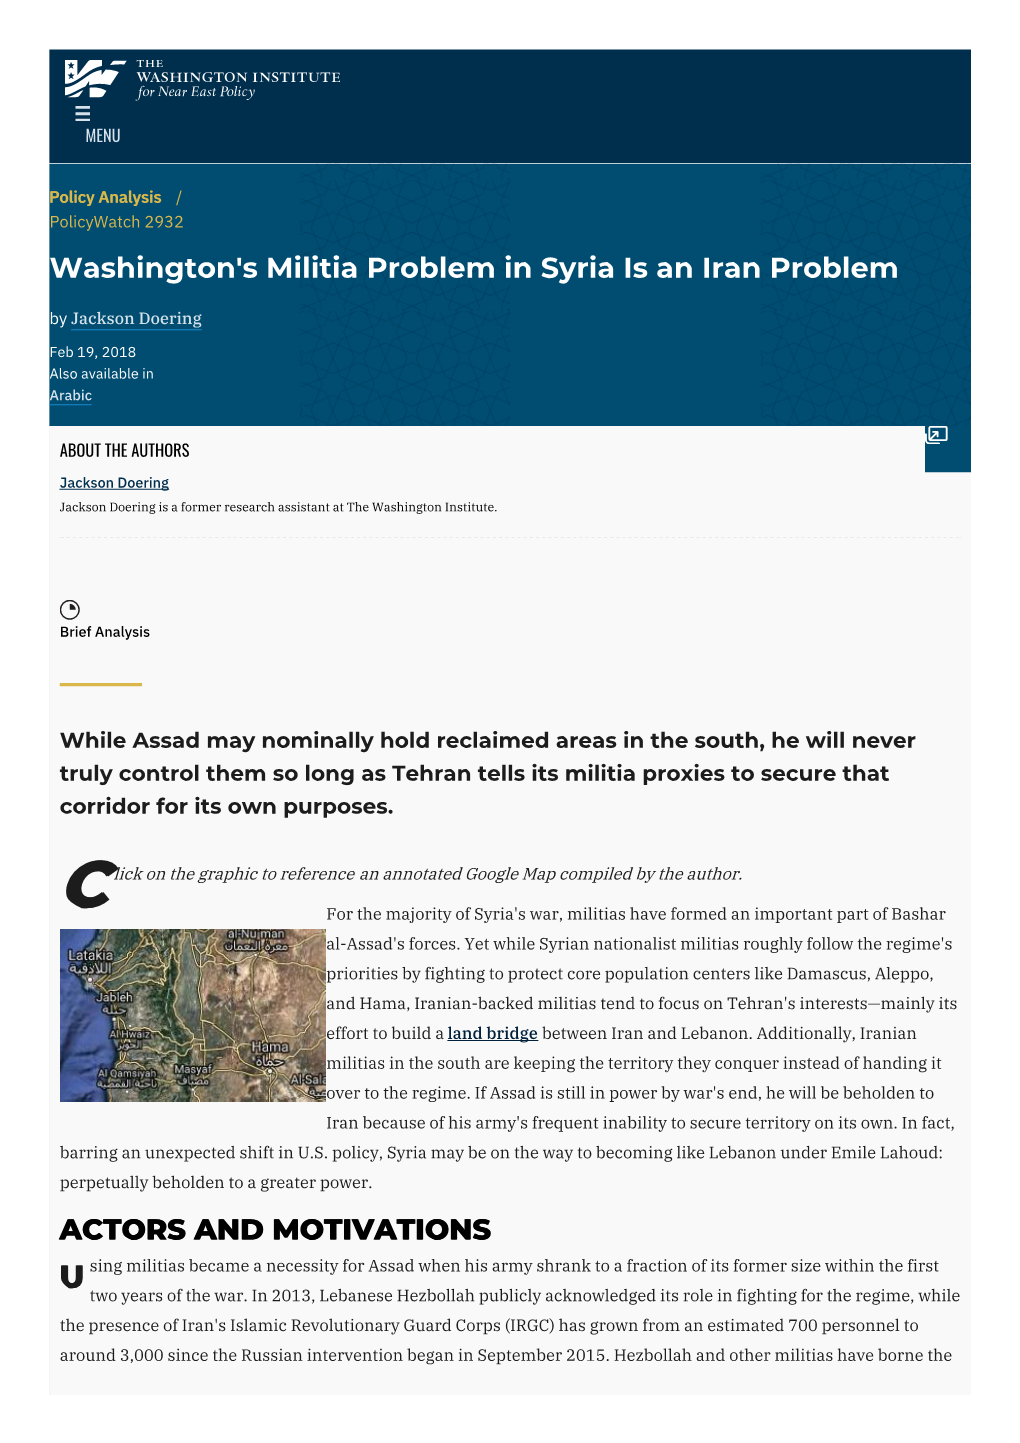 Washington's Militia Problem in Syria Is an Iran Problem by Jackson Doering